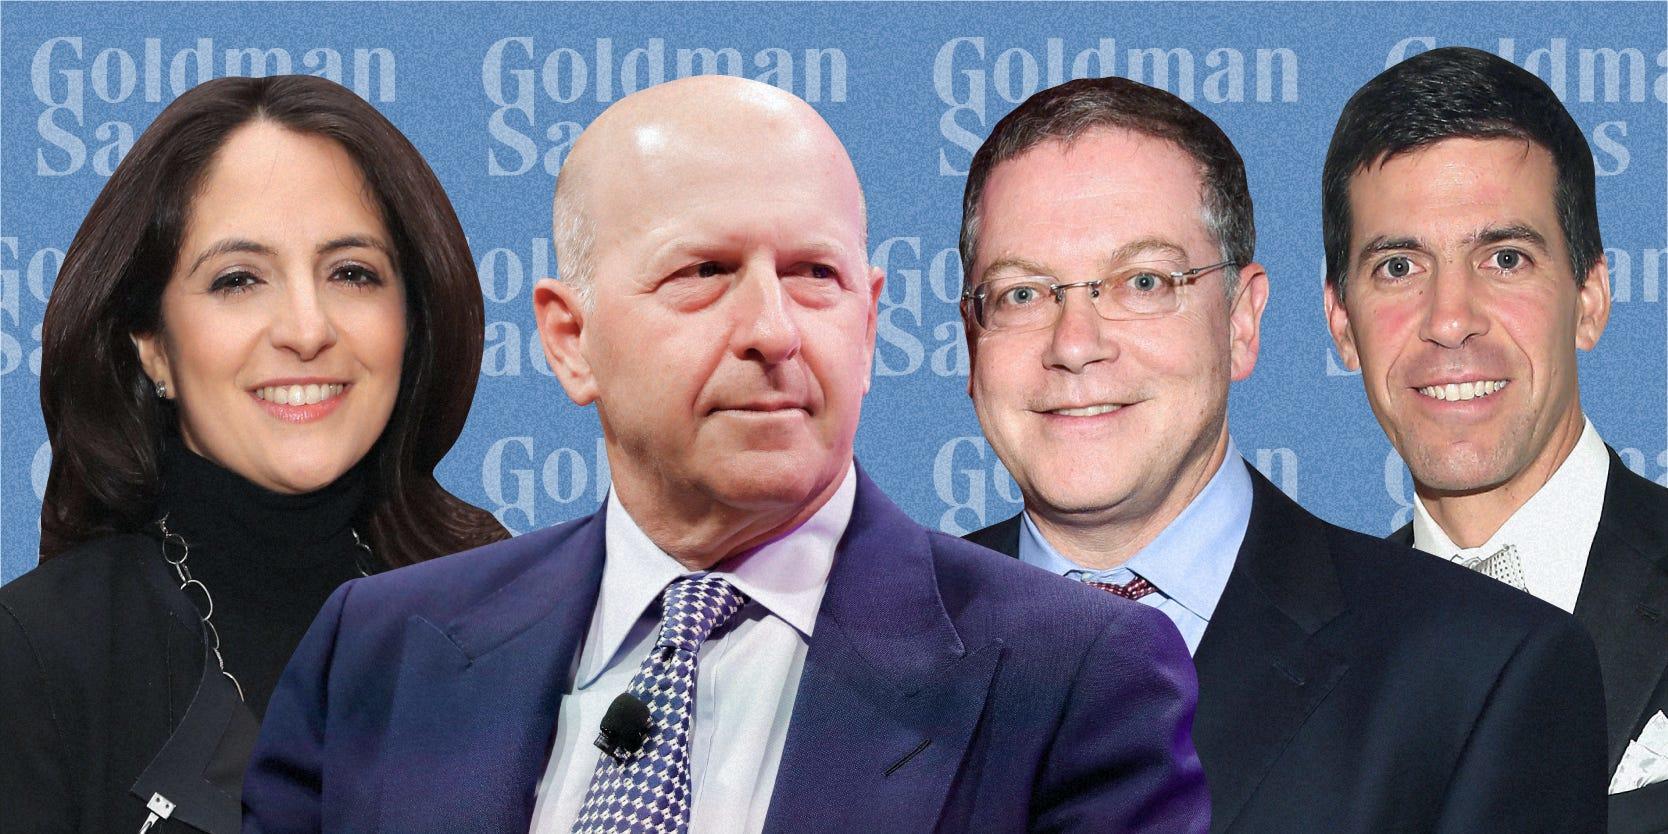 Goldman Sachs just tapped 2 people to lead a new consumer and wealth